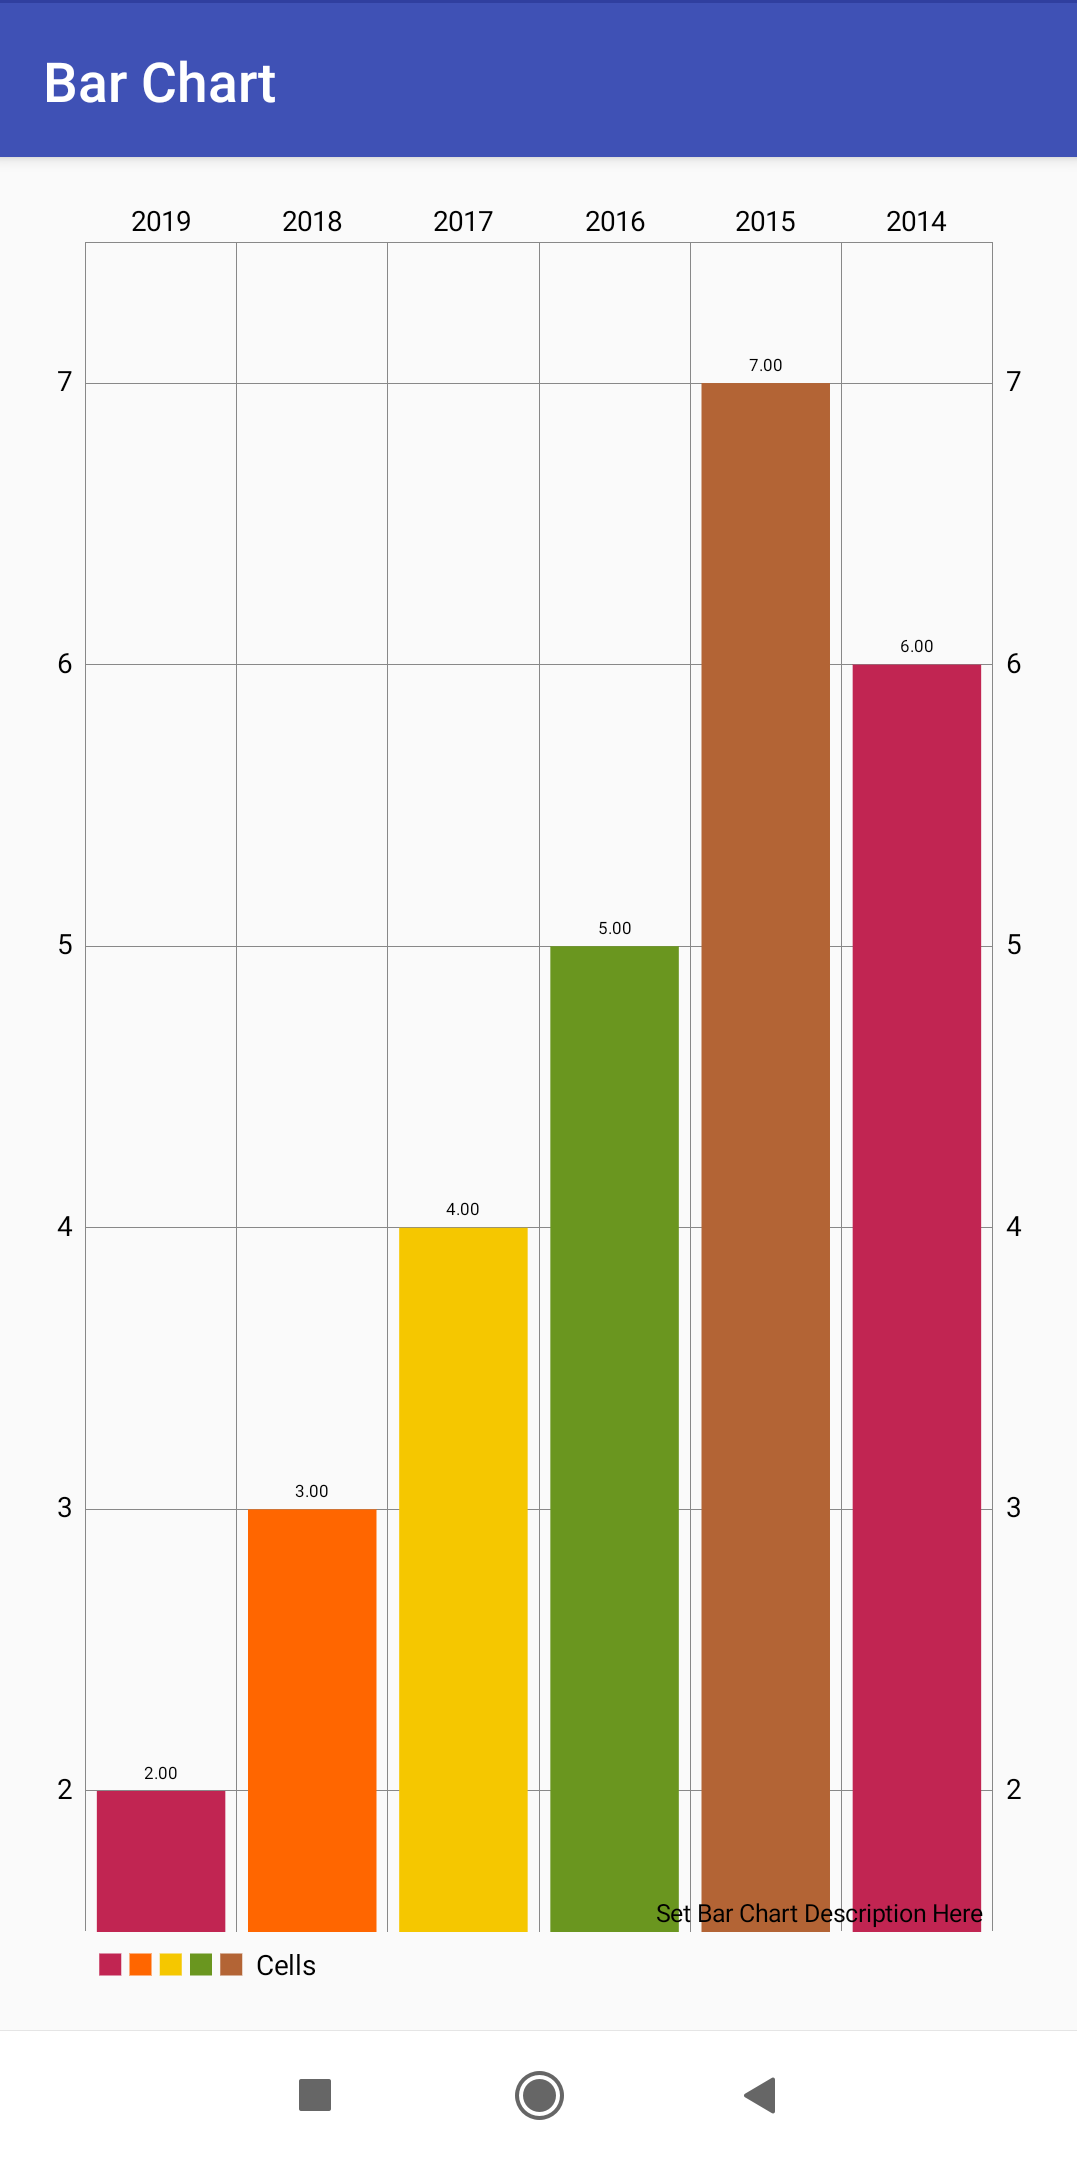 How To Make A Simple Bar Chart